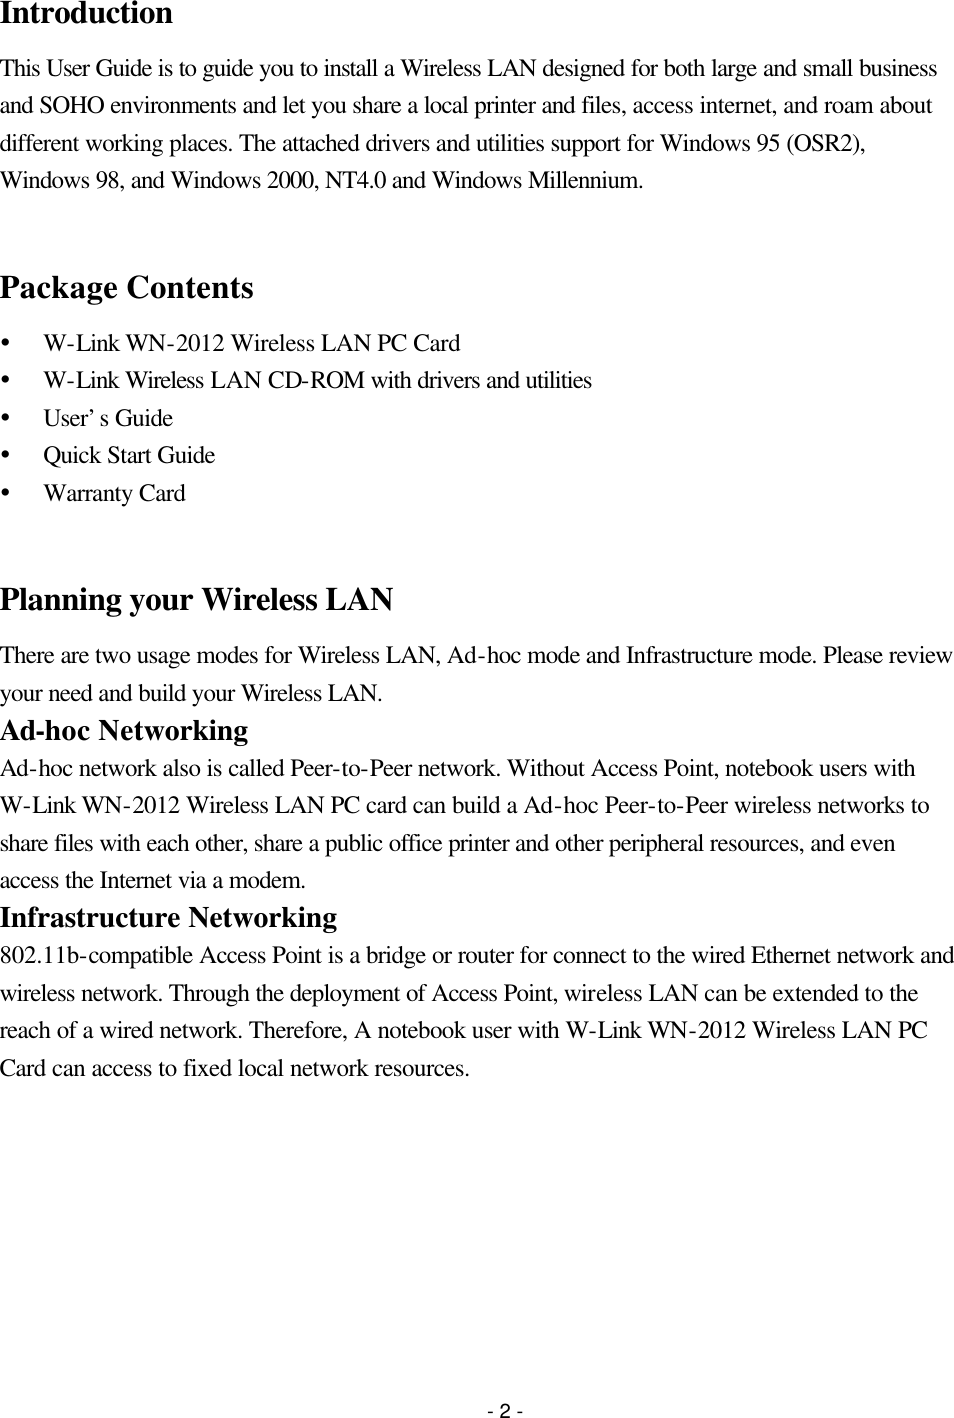 - 2 - Introduction This User Guide is to guide you to install a Wireless LAN designed for both large and small business and SOHO environments and let you share a local printer and files, access internet, and roam about different working places. The attached drivers and utilities support for Windows 95 (OSR2), Windows 98, and Windows 2000, NT4.0 and Windows Millennium.  Package Contents Ÿ W-Link WN-2012 Wireless LAN PC Card Ÿ W-Link Wireless LAN CD-ROM with drivers and utilities Ÿ User’s Guide Ÿ Quick Start Guide Ÿ Warranty Card  Planning your Wireless LAN There are two usage modes for Wireless LAN, Ad-hoc mode and Infrastructure mode. Please review your need and build your Wireless LAN. Ad-hoc Networking Ad-hoc network also is called Peer-to-Peer network. Without Access Point, notebook users with W-Link WN-2012 Wireless LAN PC card can build a Ad-hoc Peer-to-Peer wireless networks to share files with each other, share a public office printer and other peripheral resources, and even access the Internet via a modem. Infrastructure Networking 802.11b-compatible Access Point is a bridge or router for connect to the wired Ethernet network and wireless network. Through the deployment of Access Point, wireless LAN can be extended to the reach of a wired network. Therefore, A notebook user with W-Link WN-2012 Wireless LAN PC Card can access to fixed local network resources. 